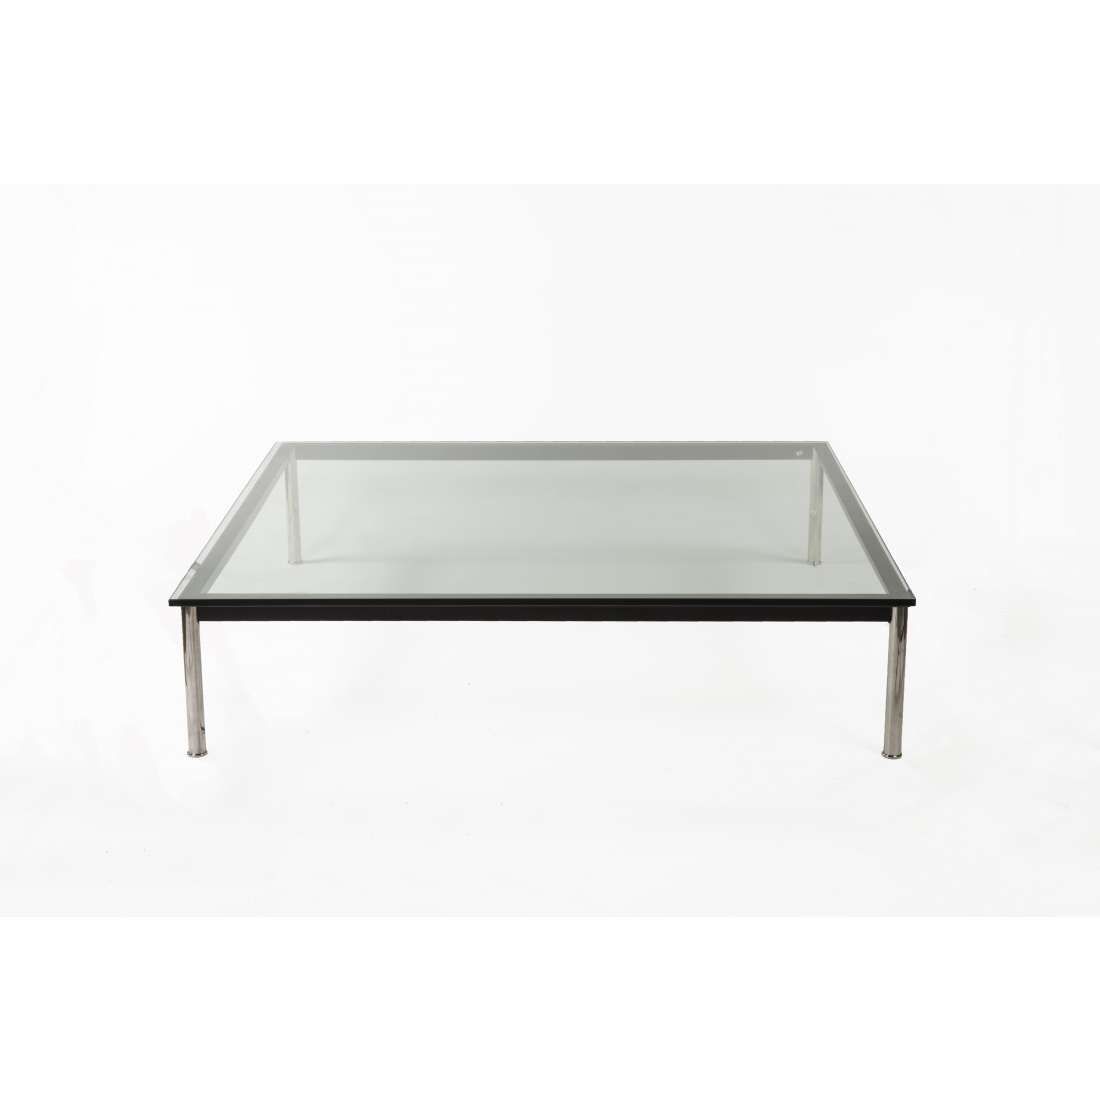 Mid Century Modern Reproduction Lc10 Square Low Coffee Throughout Most Popular Large Square Low Coffee Tables (View 17 of 20)